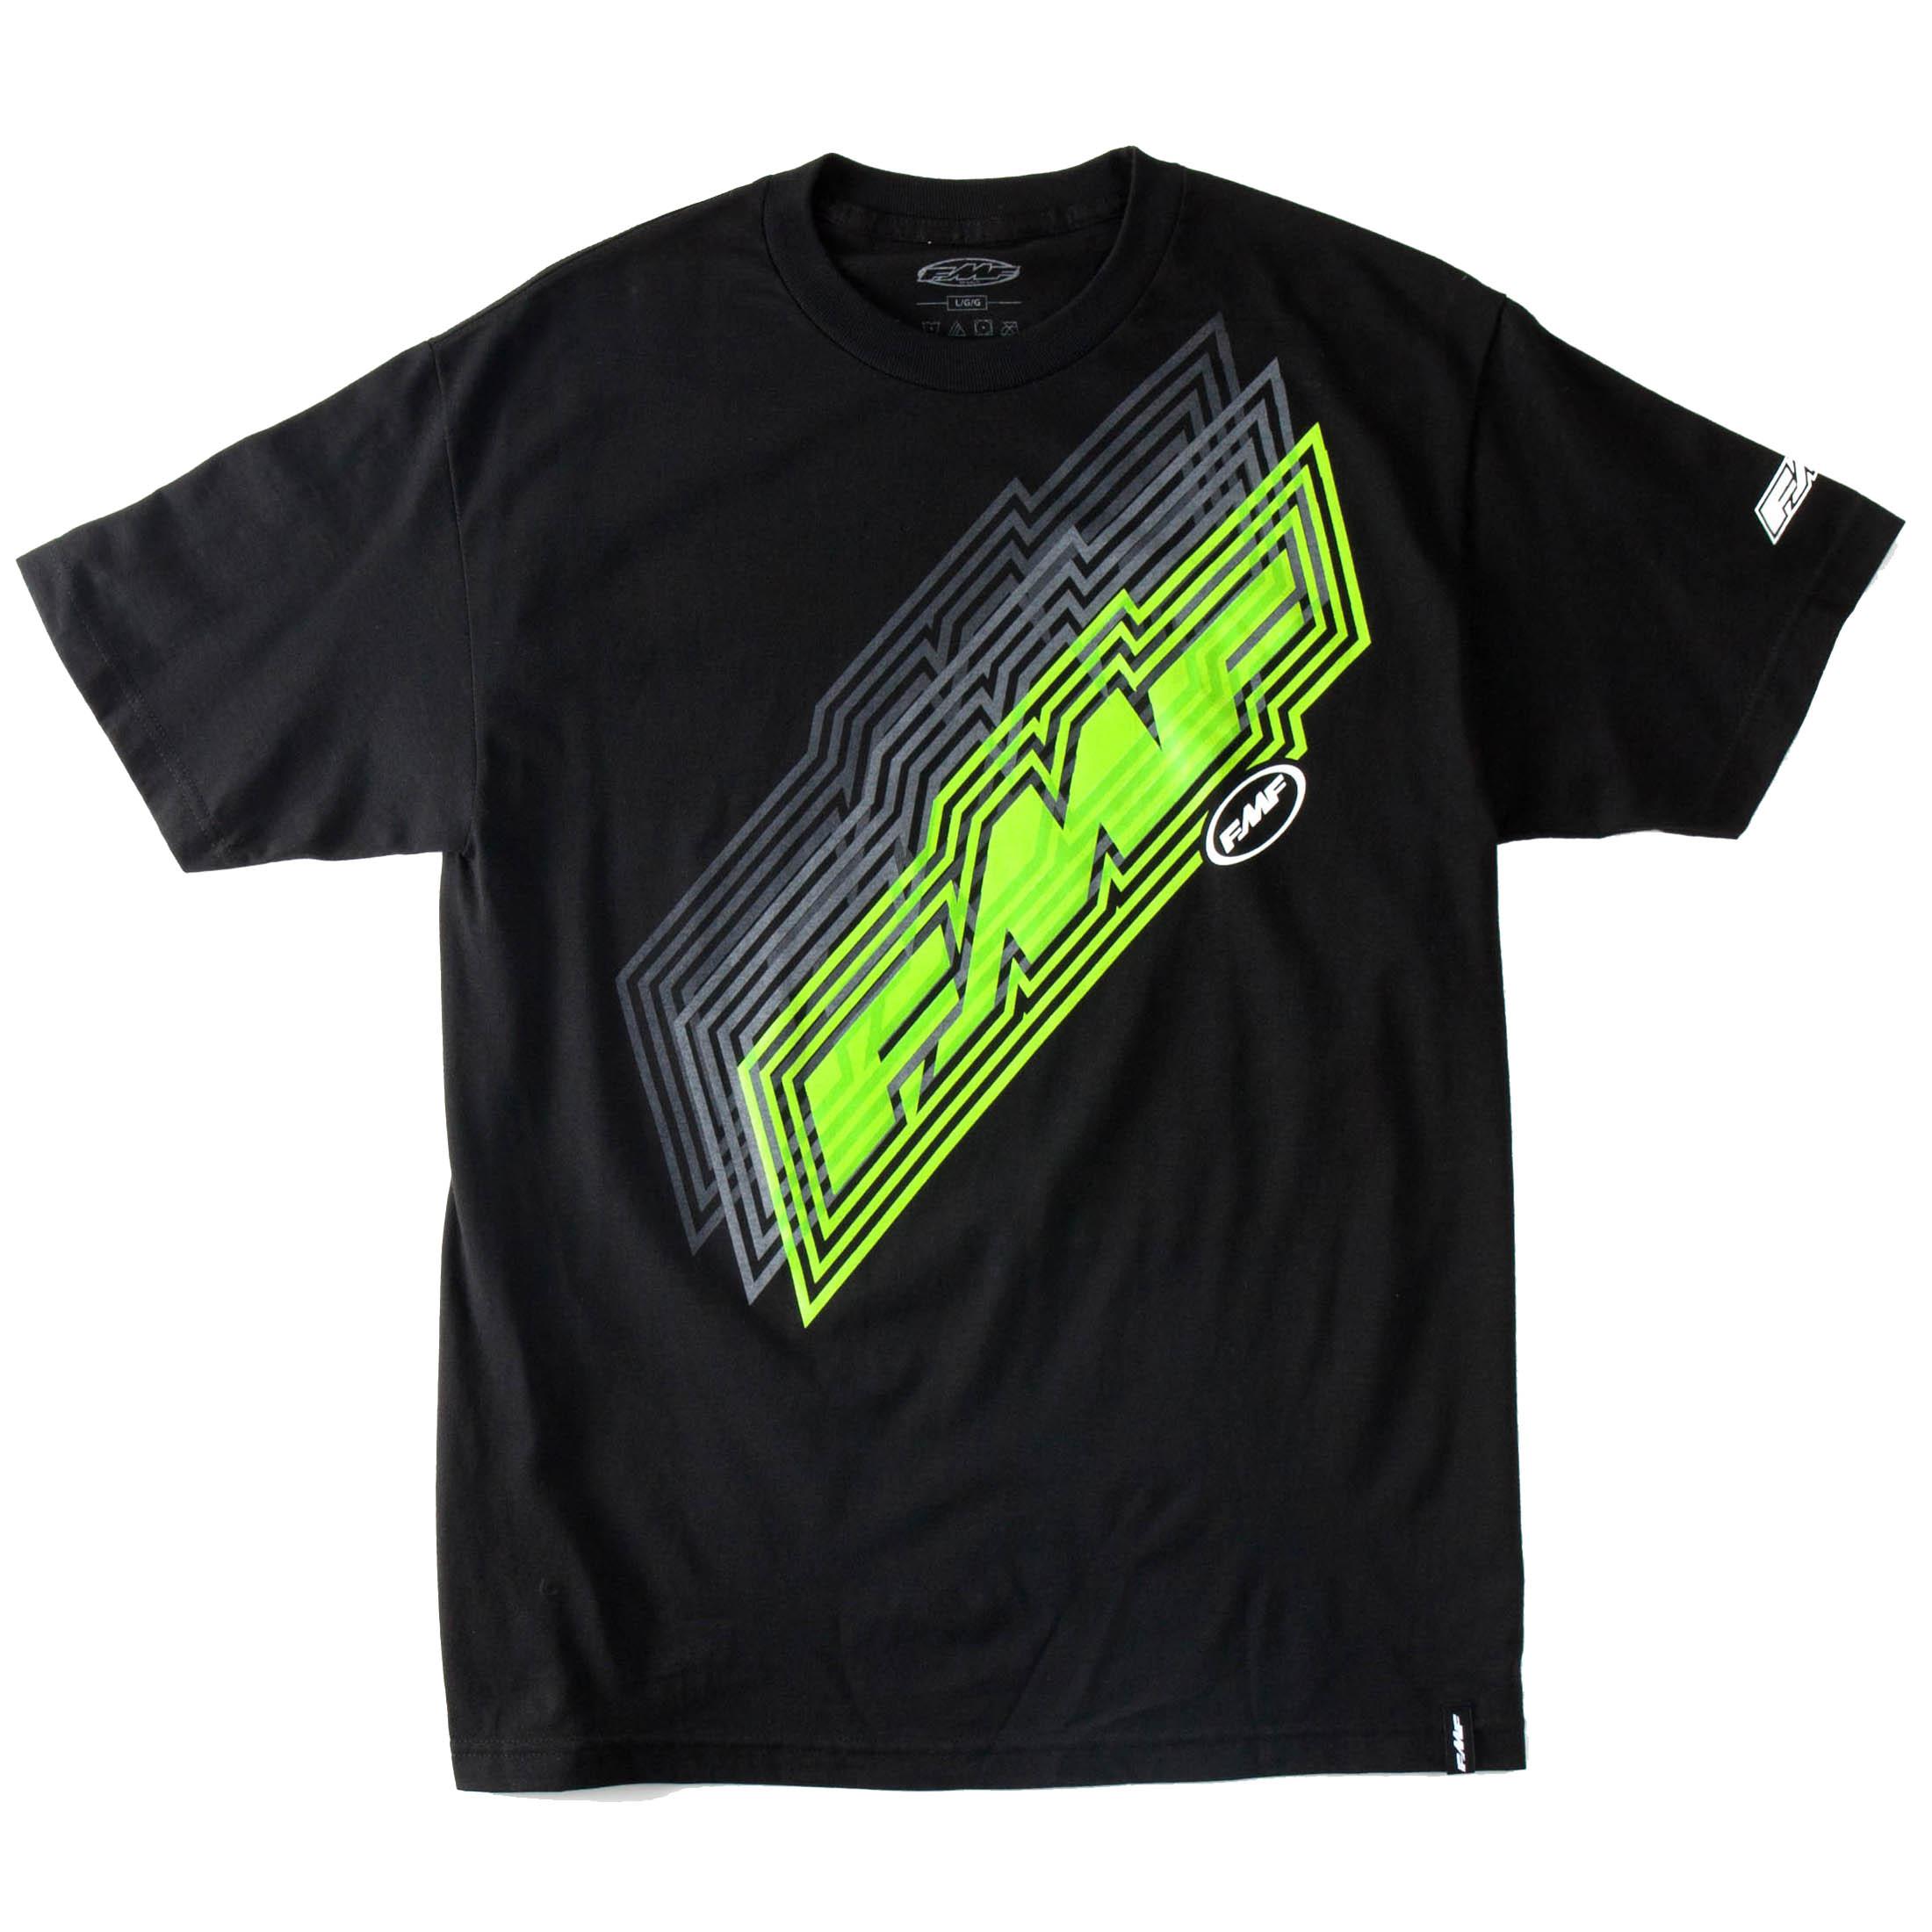 Fmf apparel face off t-shirt motorcycle shirts